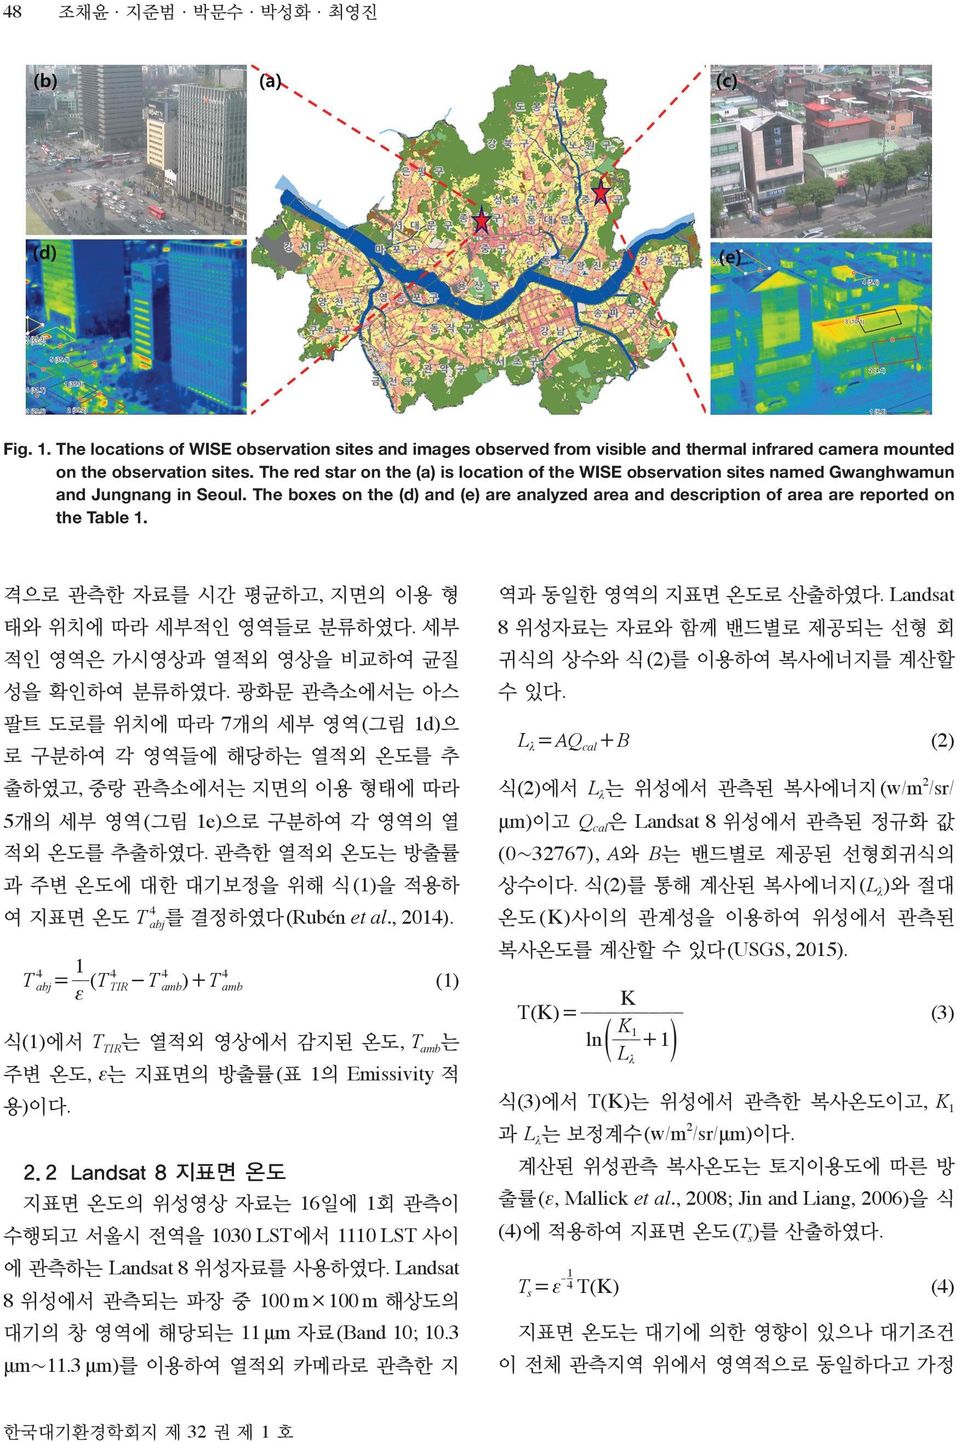 The boxes on the (d) and (e) are analyzed area and description of area are reported on the Table 1. 격으로 관측한 자료를 시간 평균하고, 지면의 이용 형 태와 위치에 따라 세부적인 영역들로 분류하였다.